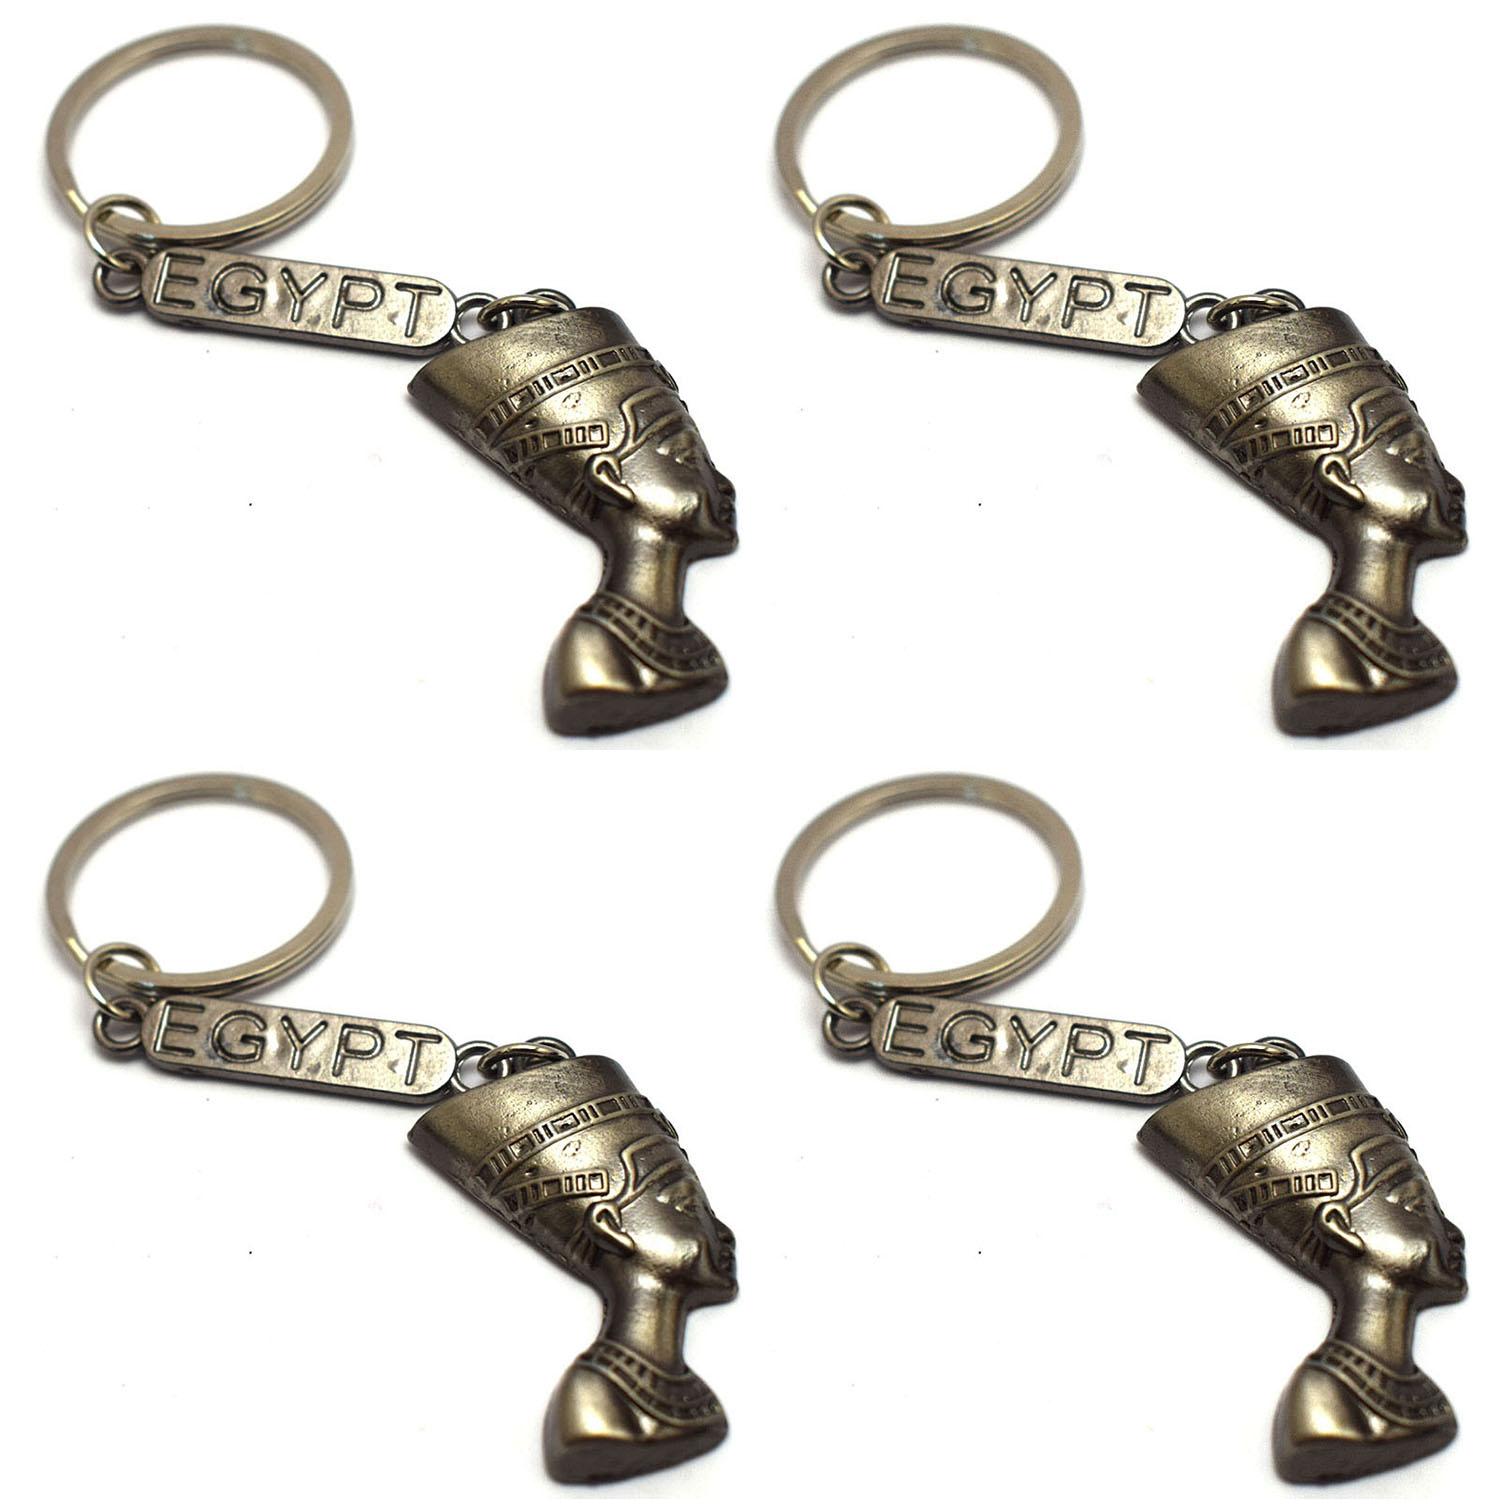 4 pieces of immatgar pharaonic Egyptian Queen Nefertiti keychain Egyptian souvenirs gifts - Inspired Gift from Egypt ( Light Black )